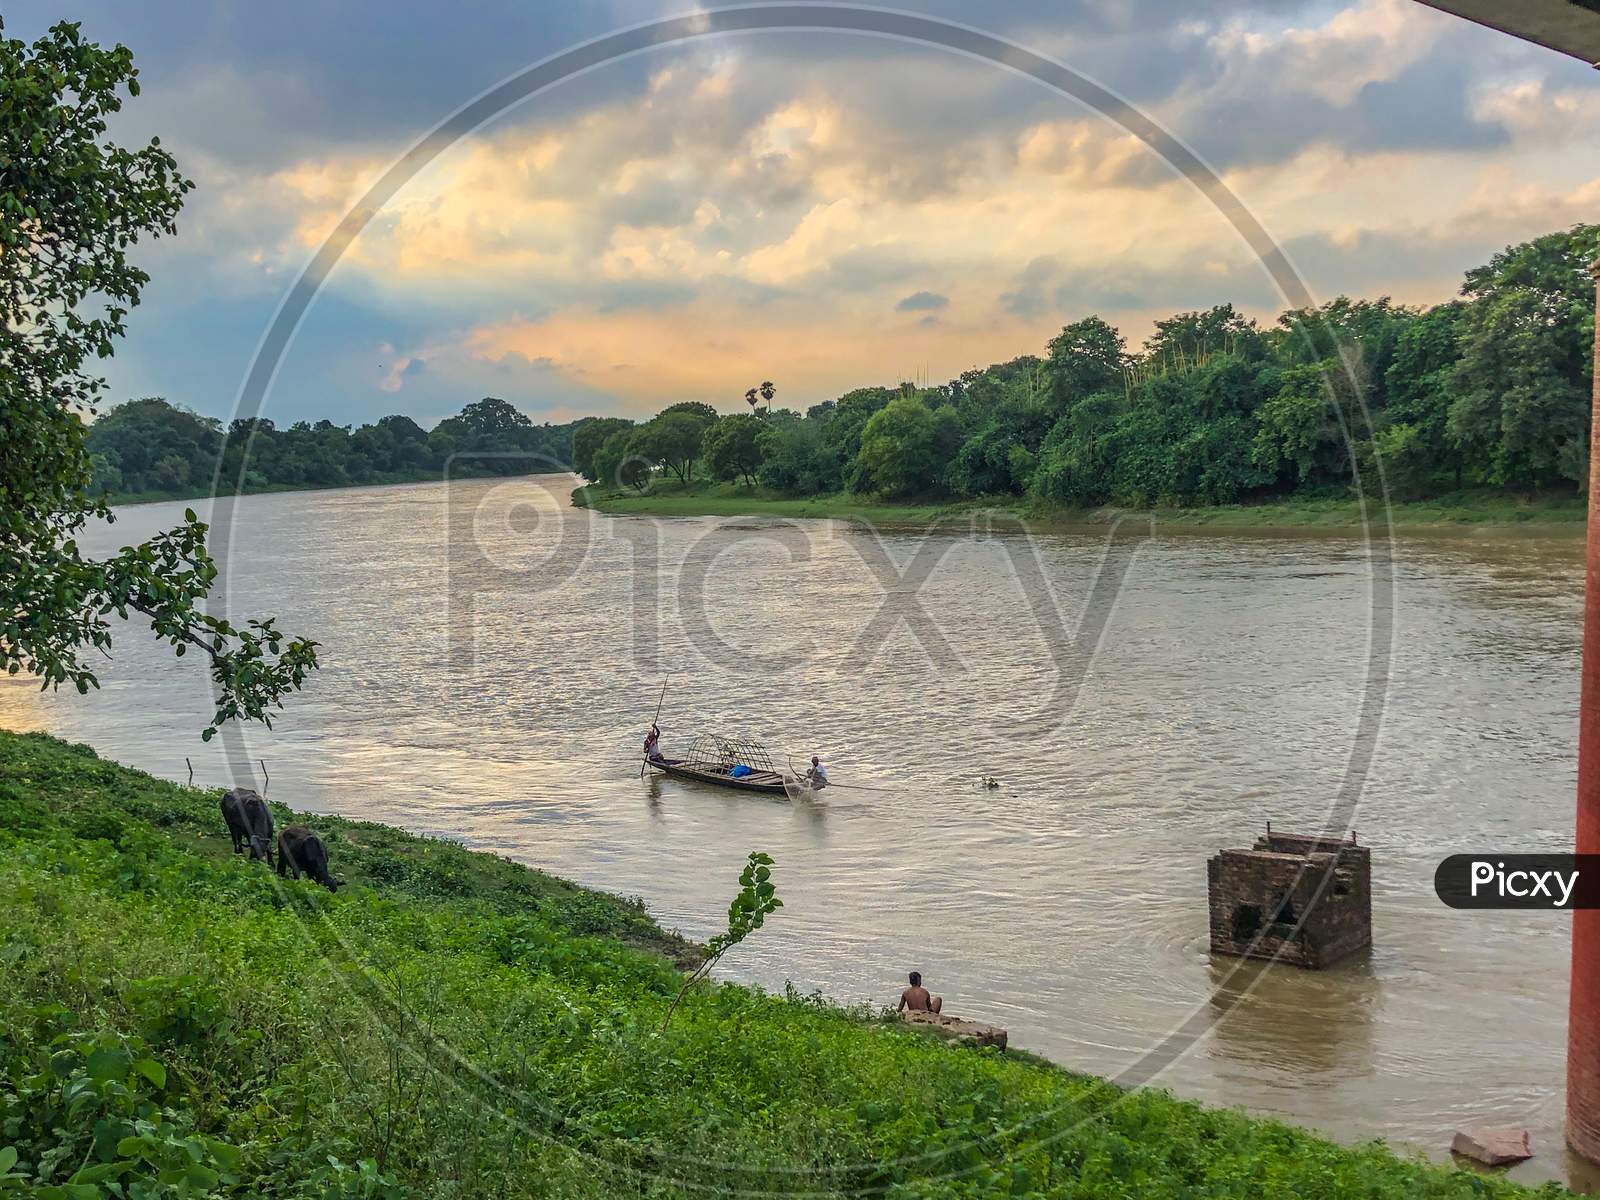 Boats and river click in sunset time